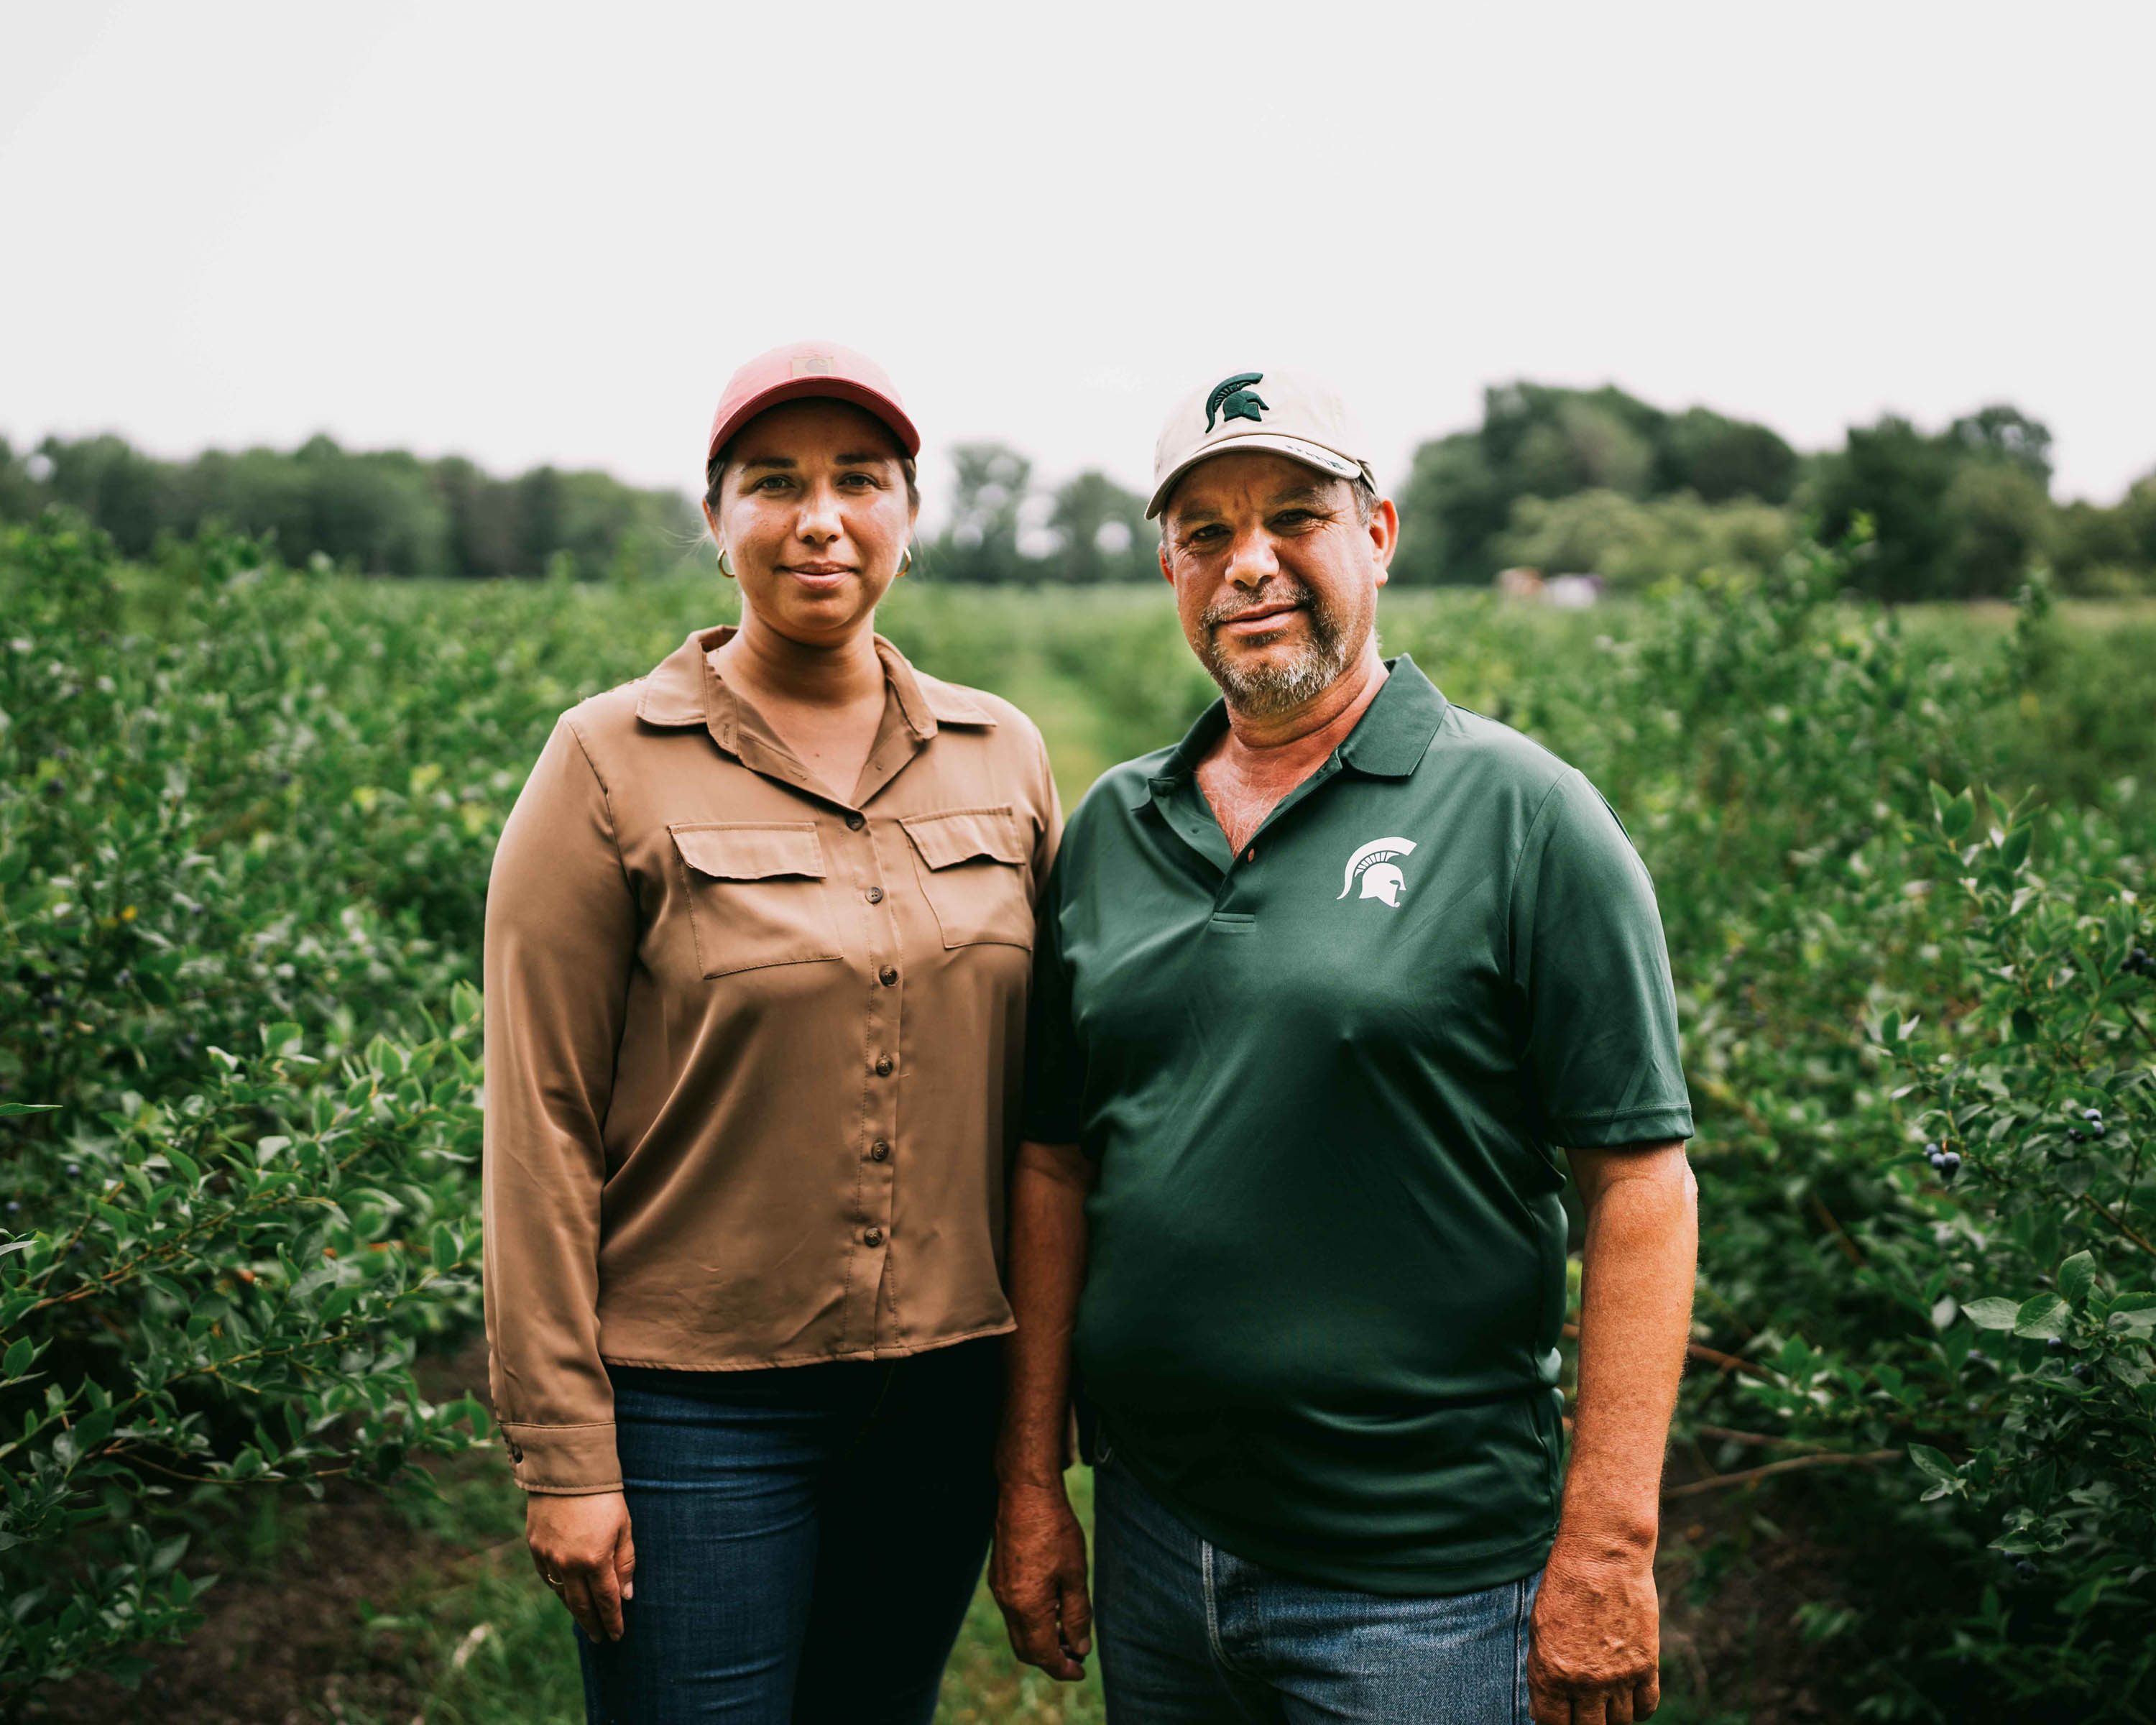 Juan Pedro and his daughter standing in front of rows of blueberries.